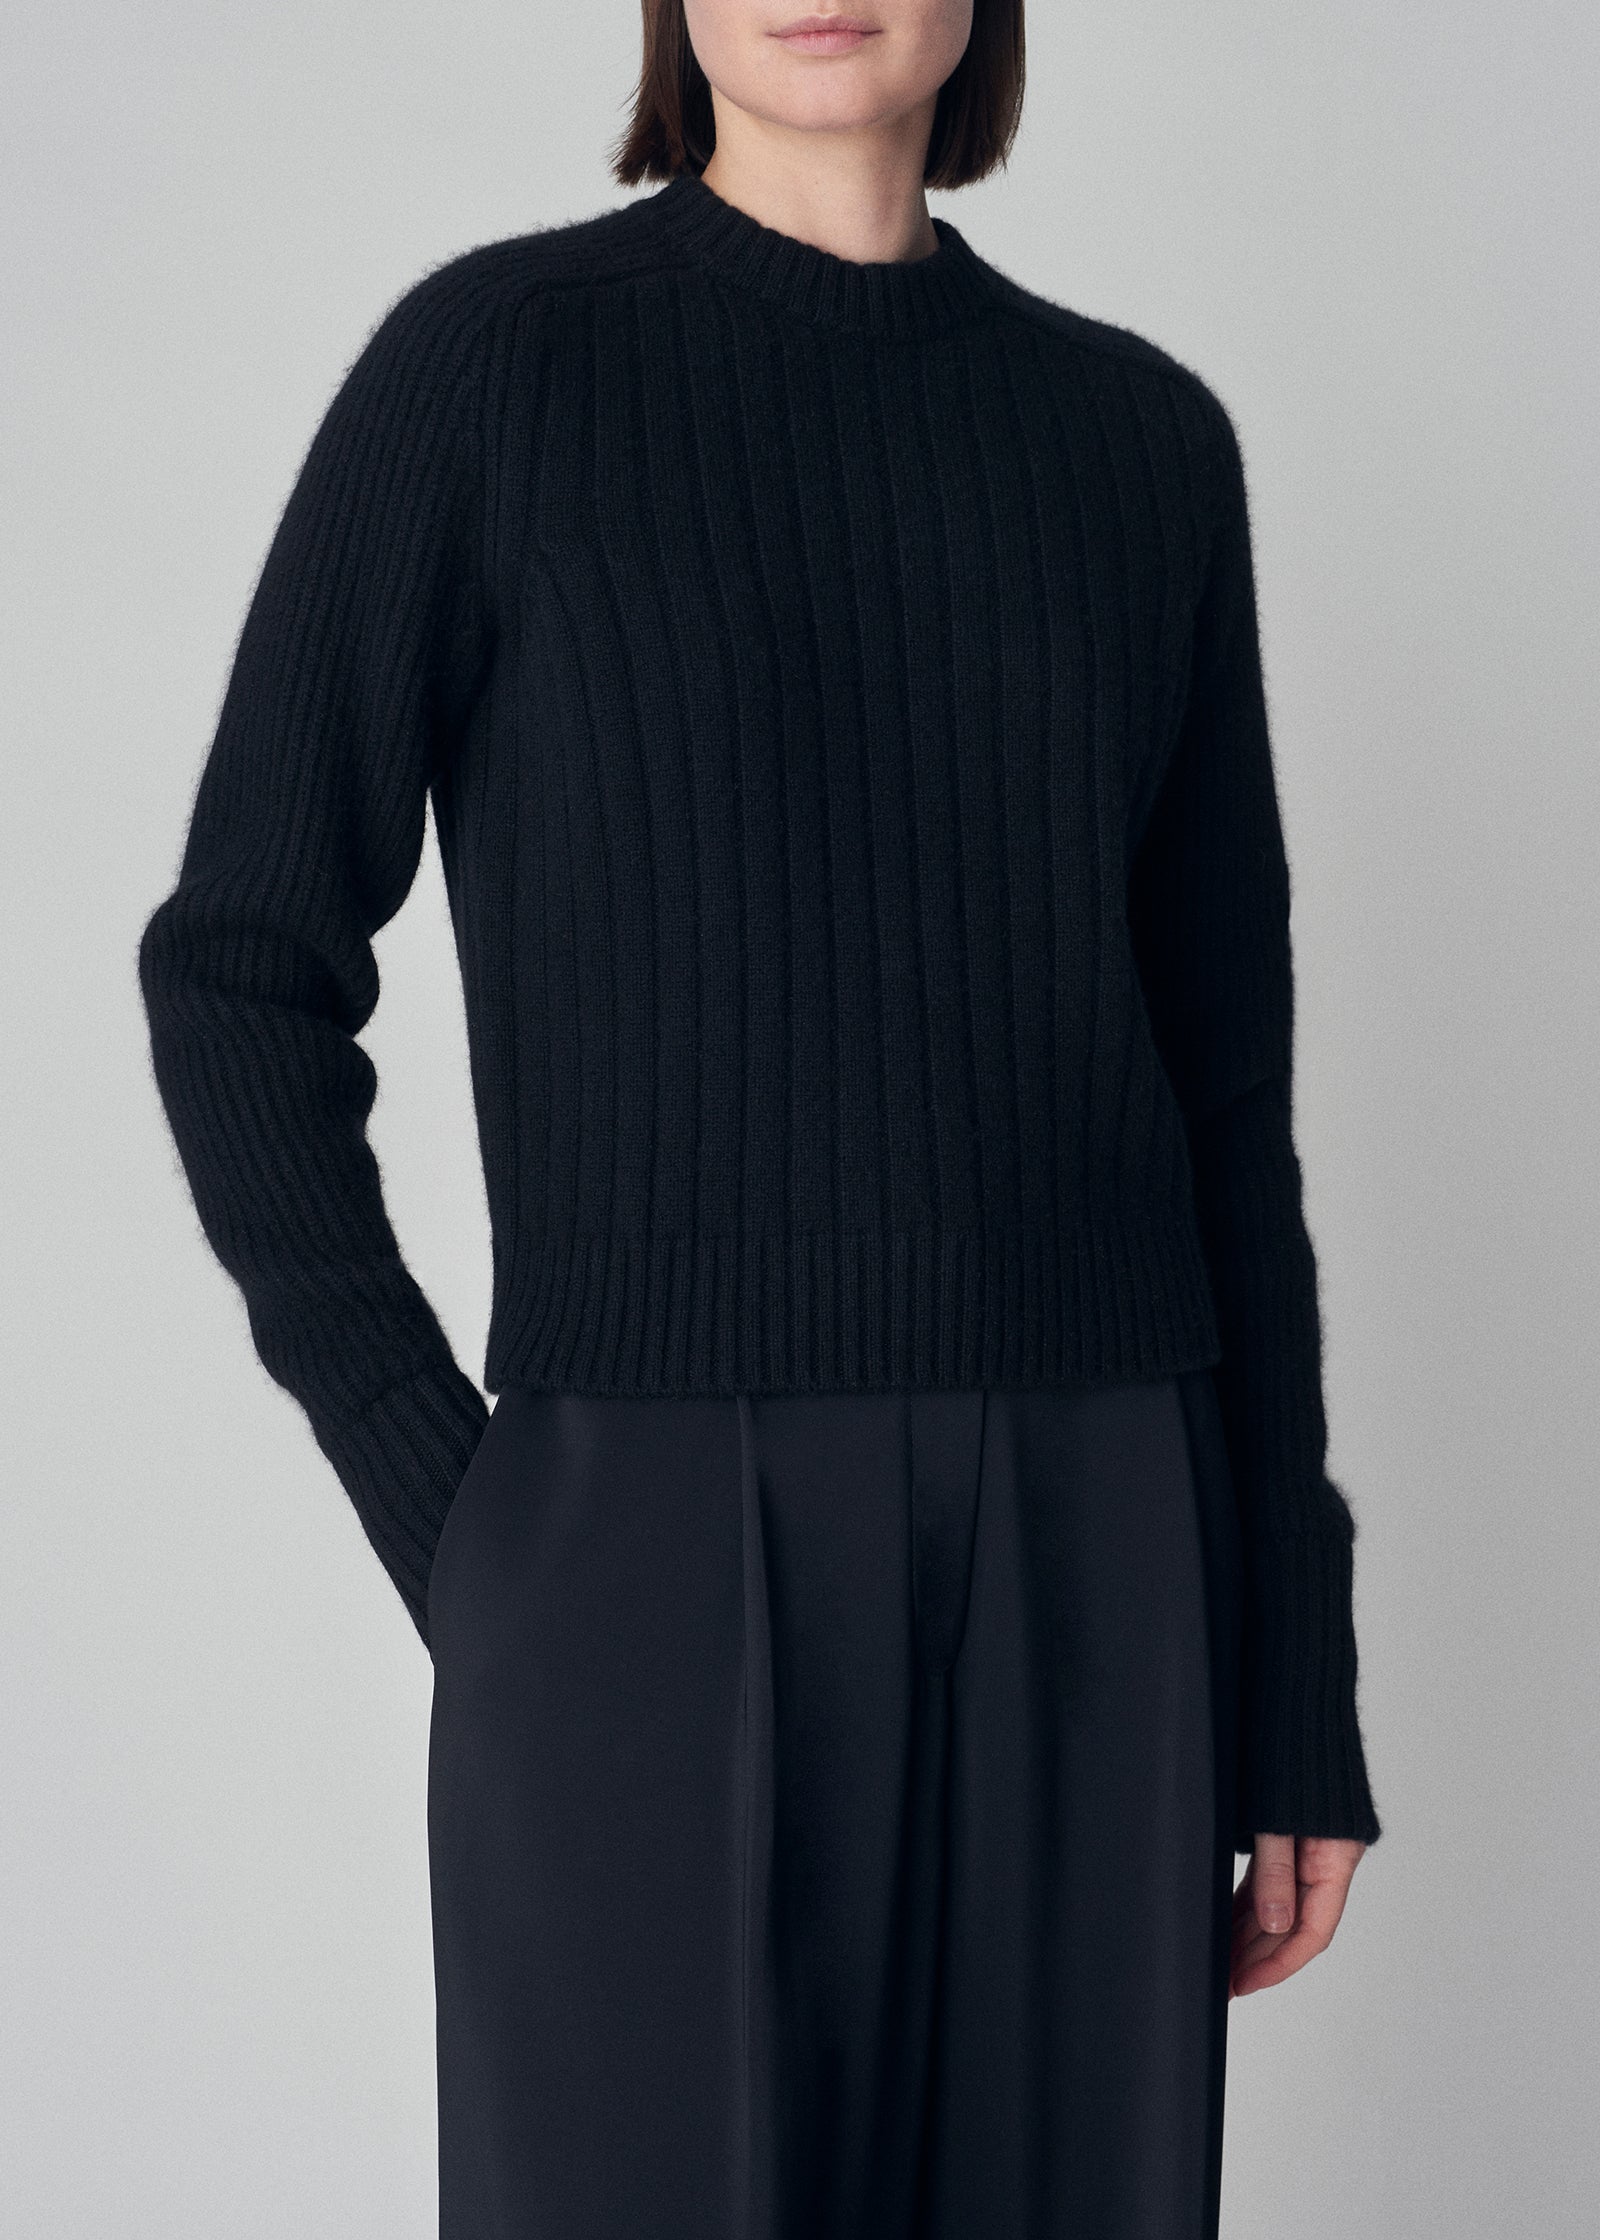 Crew Neck Sweater in Wool Cashmere  - Black - CO Collections